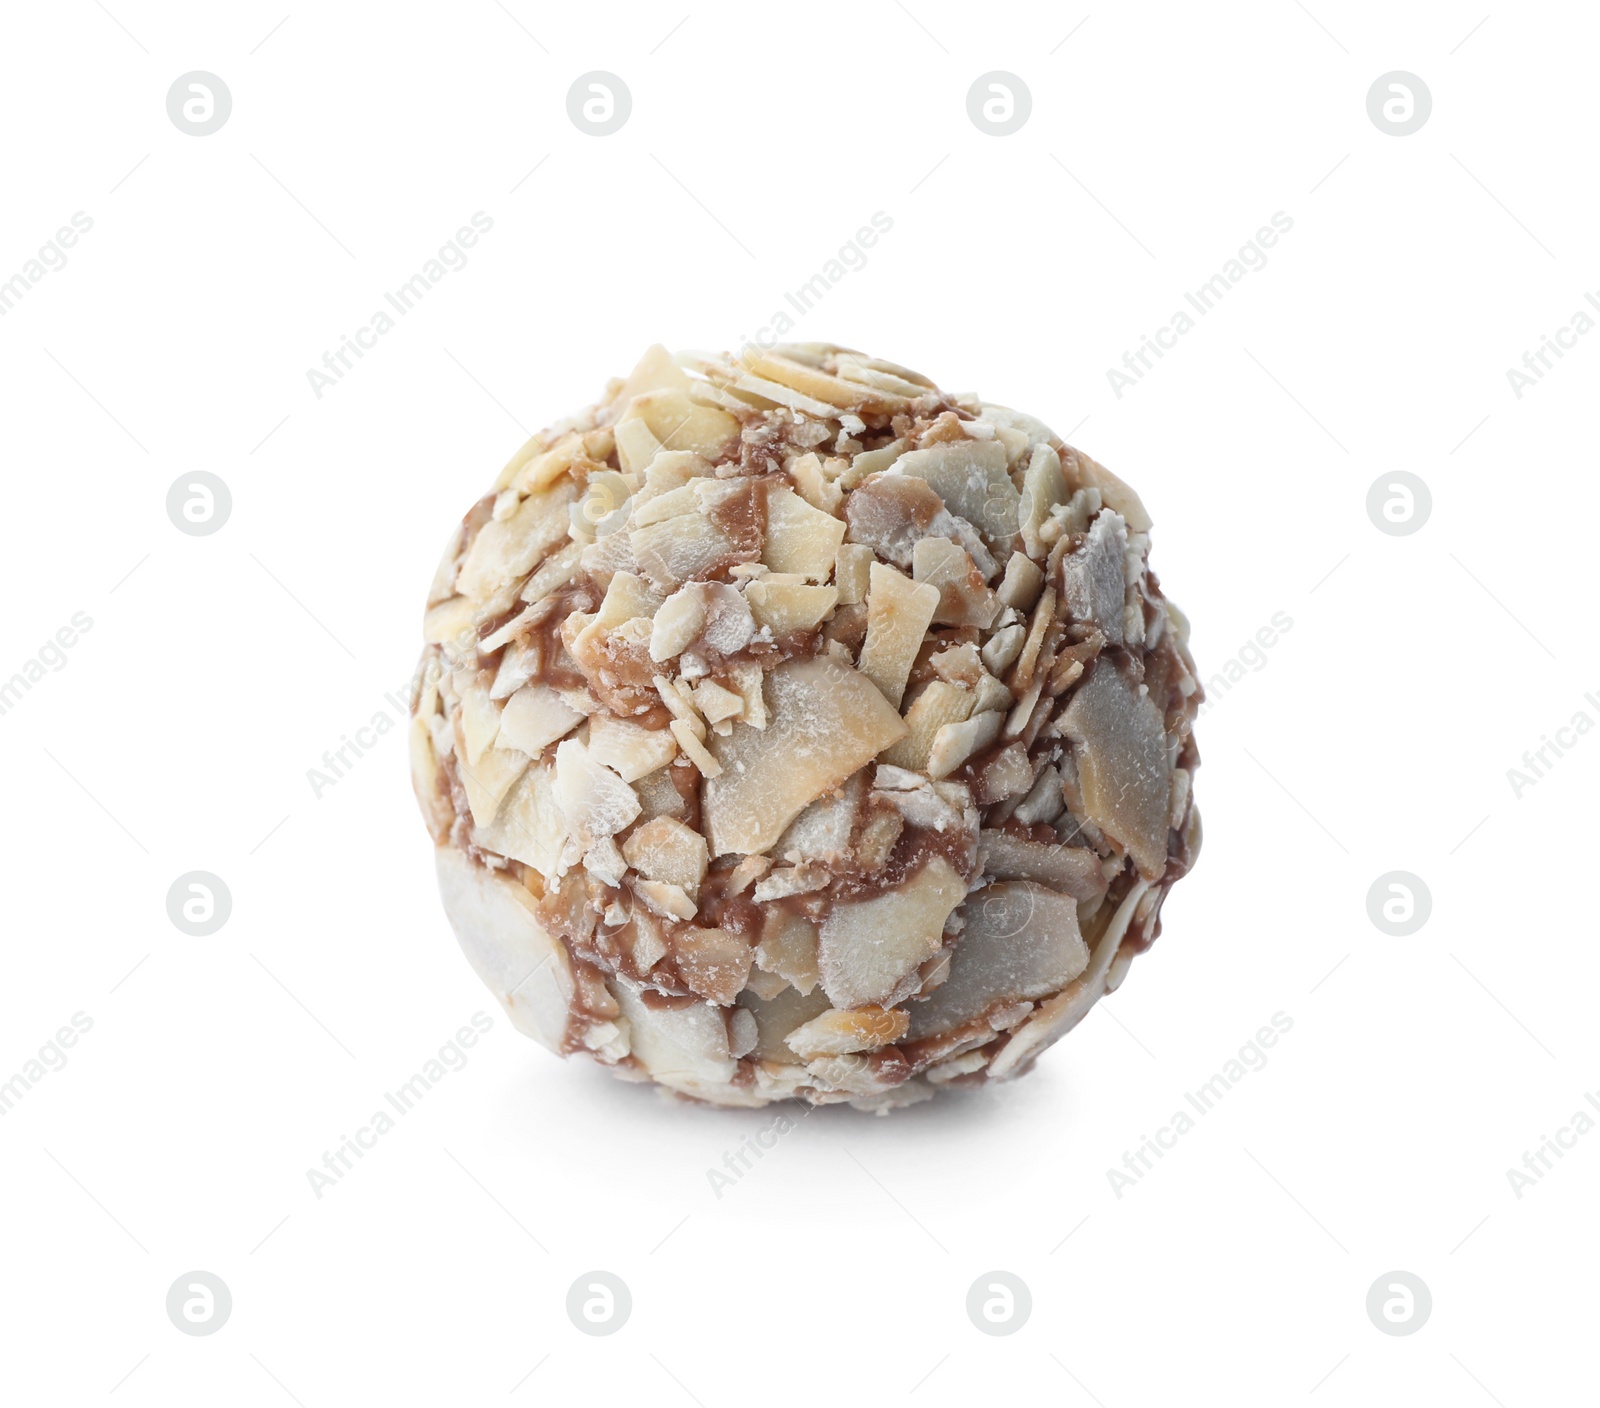 Photo of Delicious chocolate candy with almond flakes isolated on white